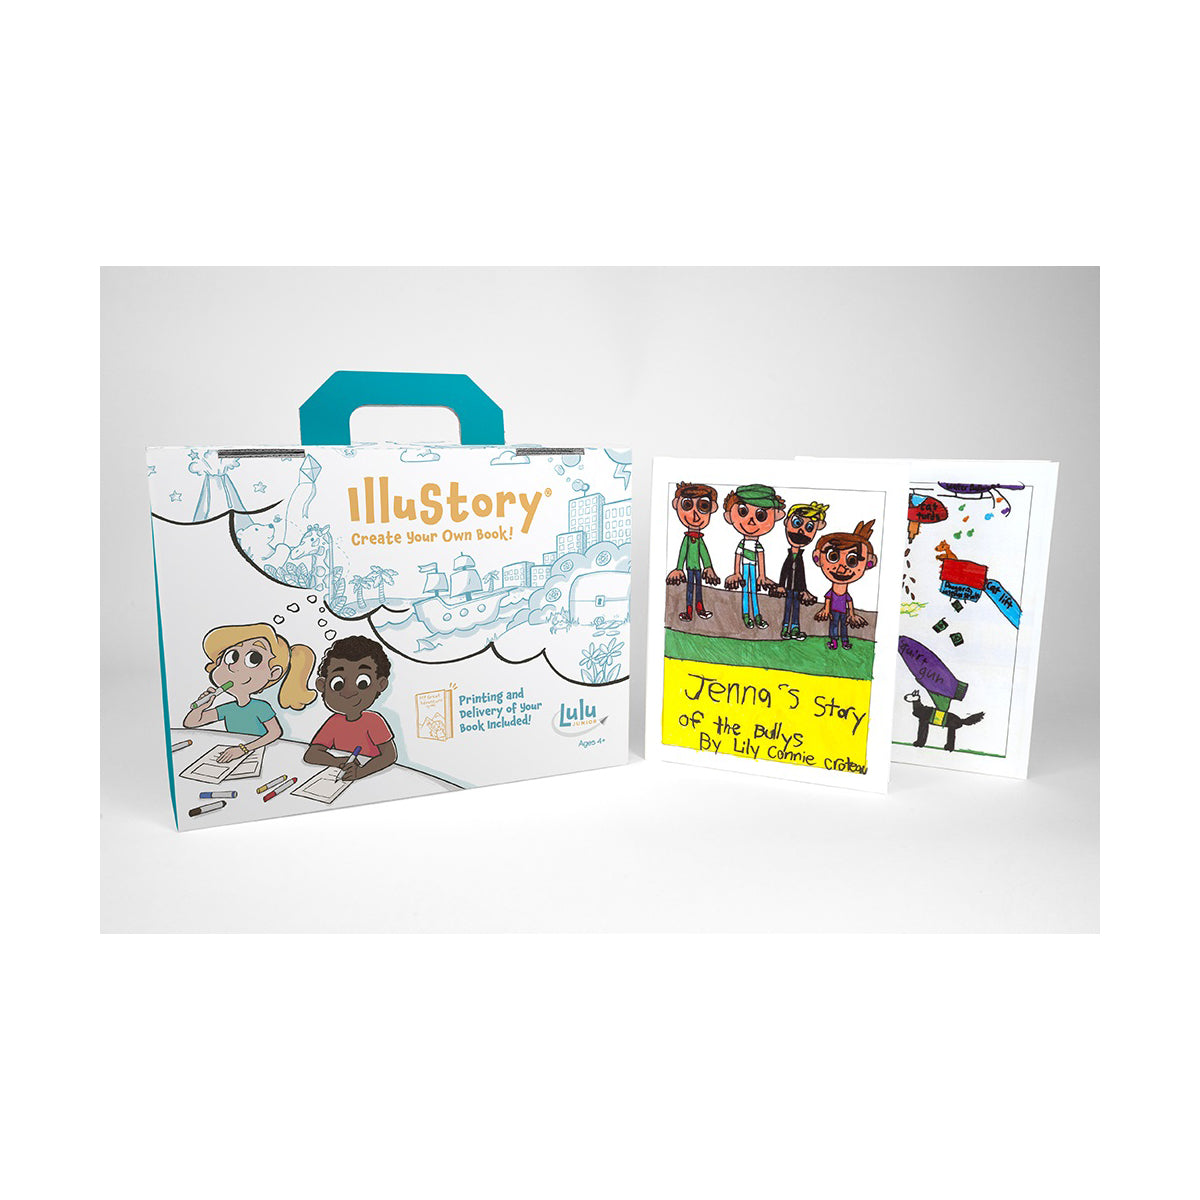 Comic Book Kit - A2Z Science & Learning Toy Store